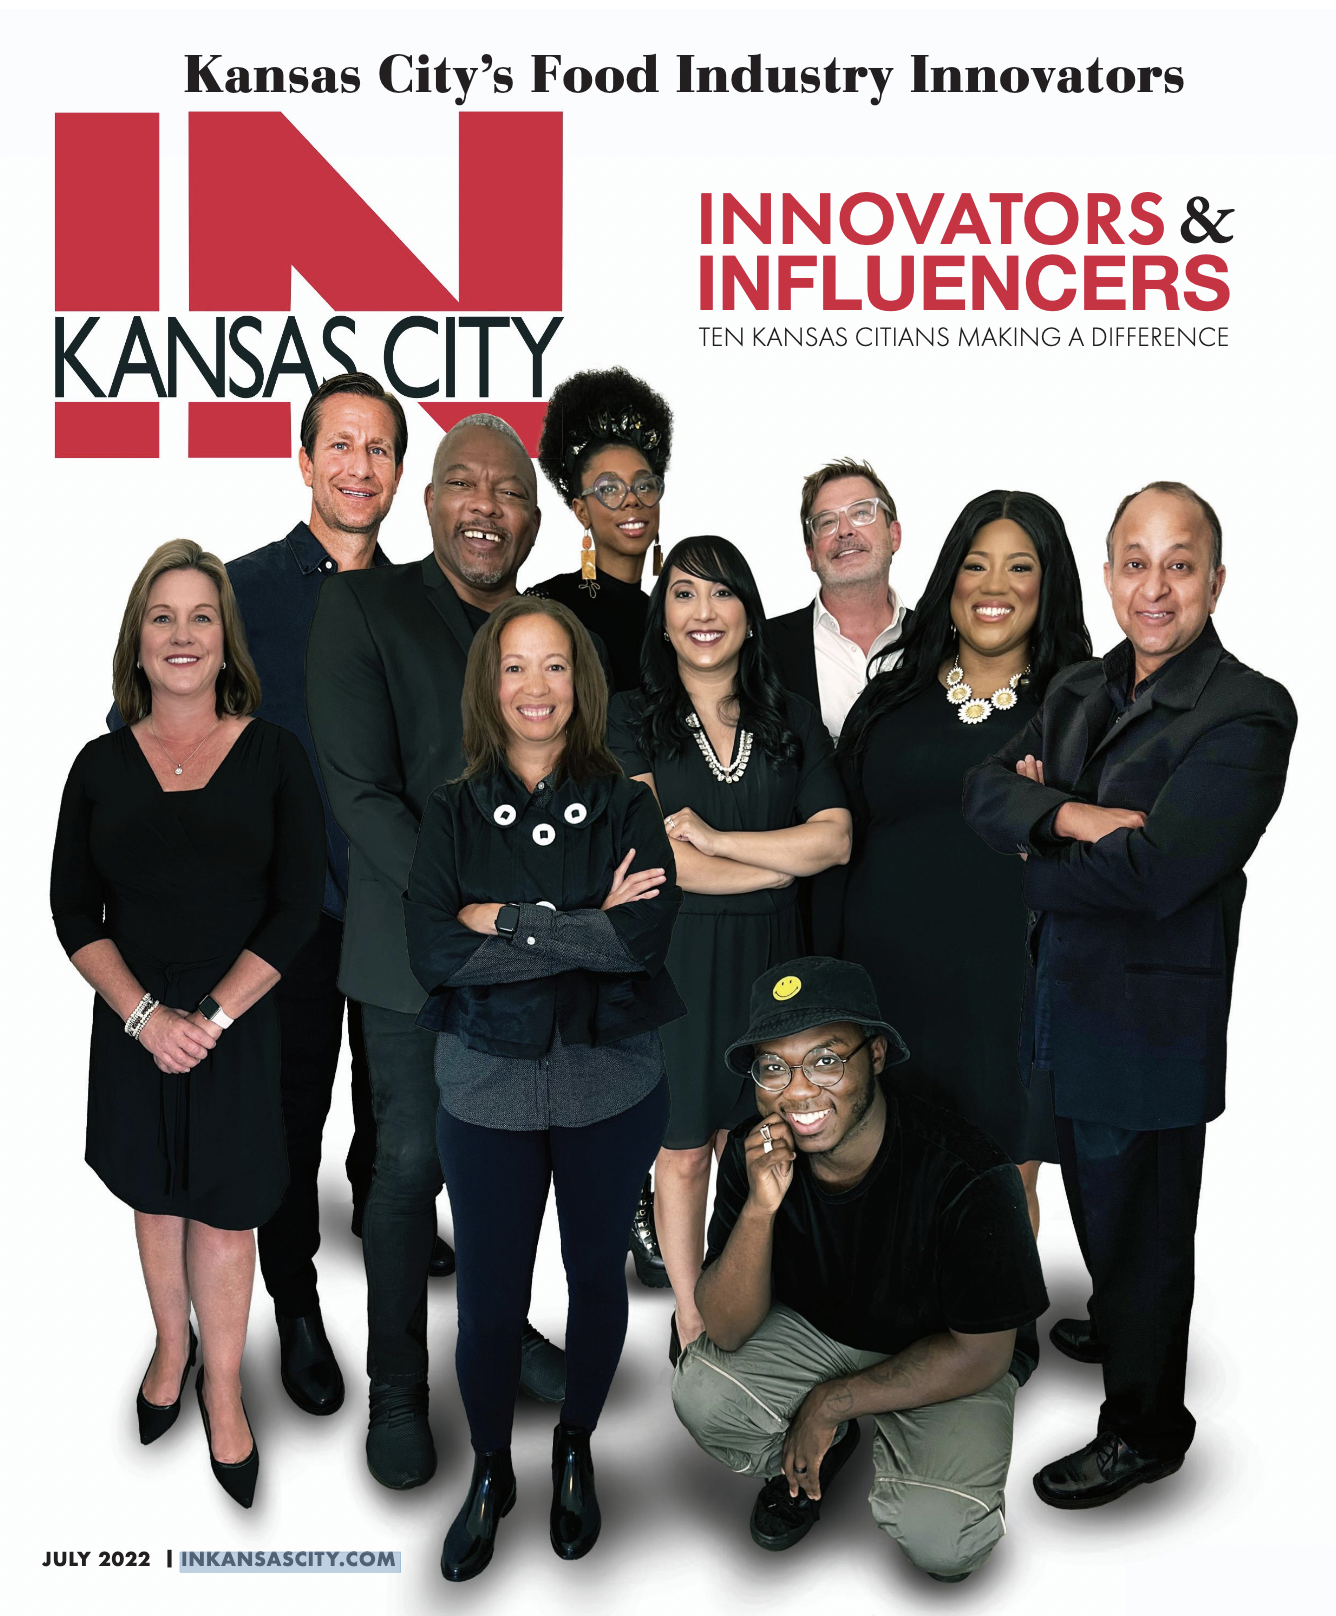 Dr. Patel standing amongst the other individuals named in article, Ten Kansas Citians Making a Difference,